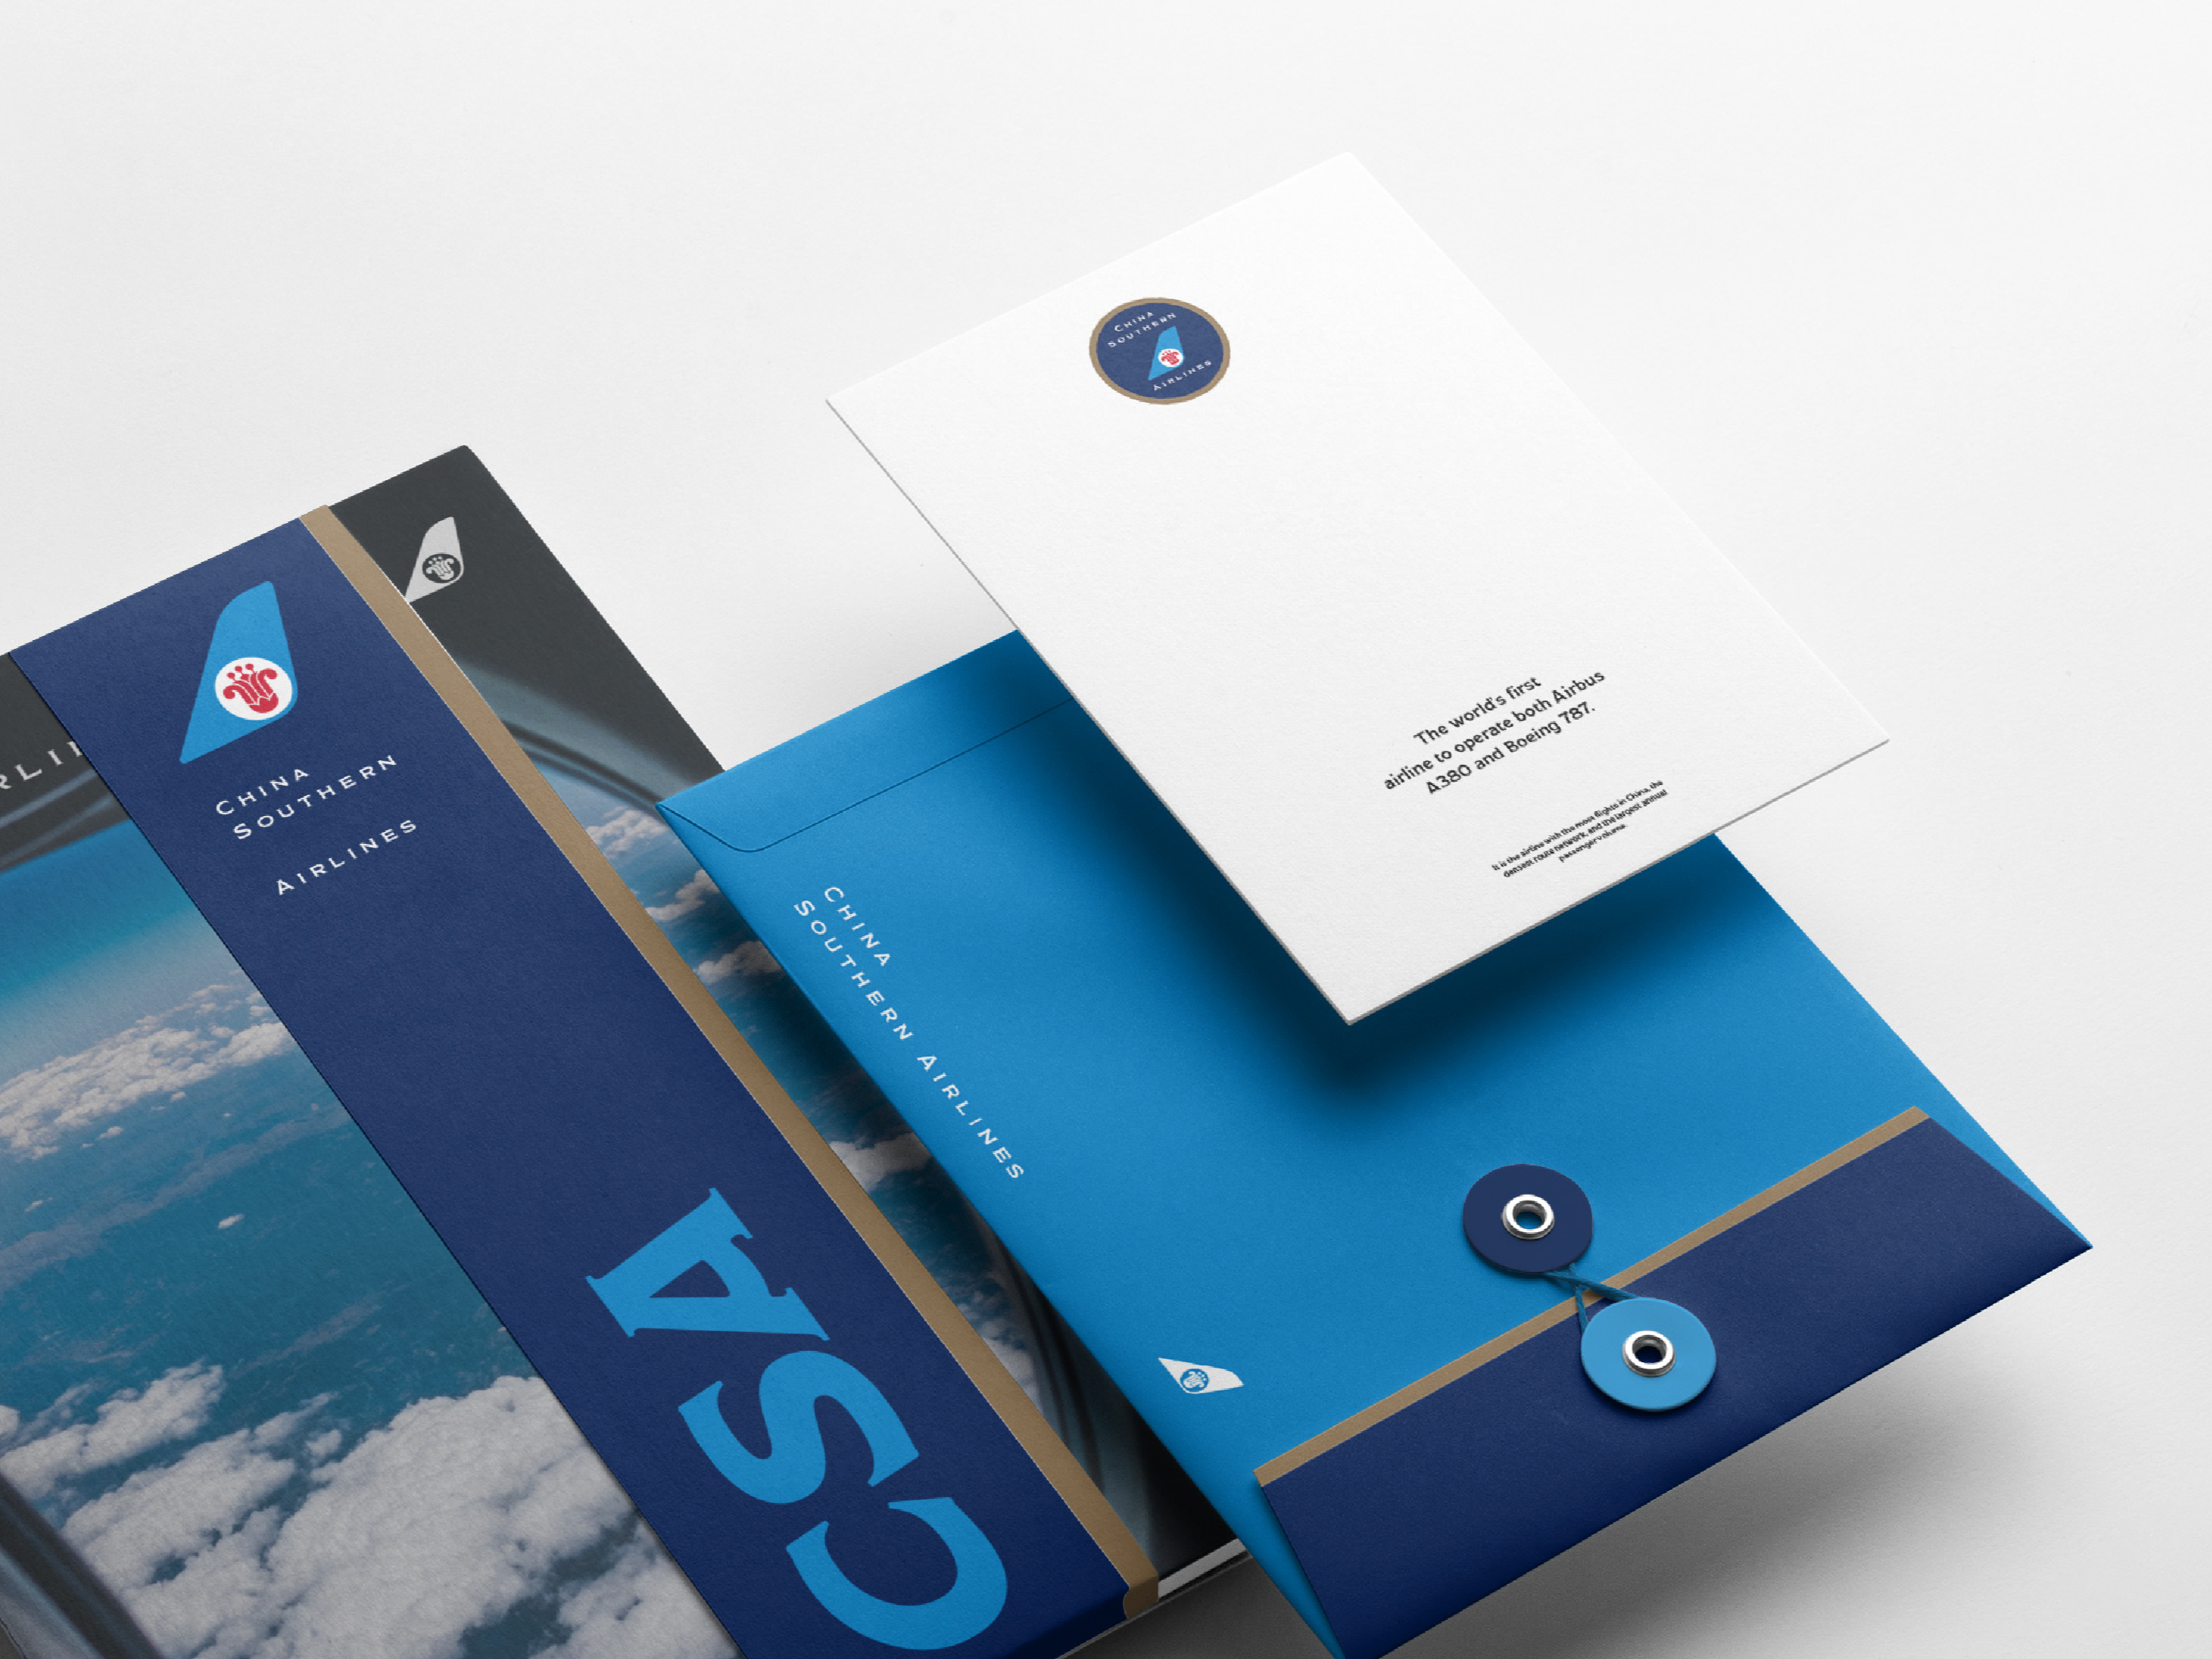 China Southern Airlines Redesign